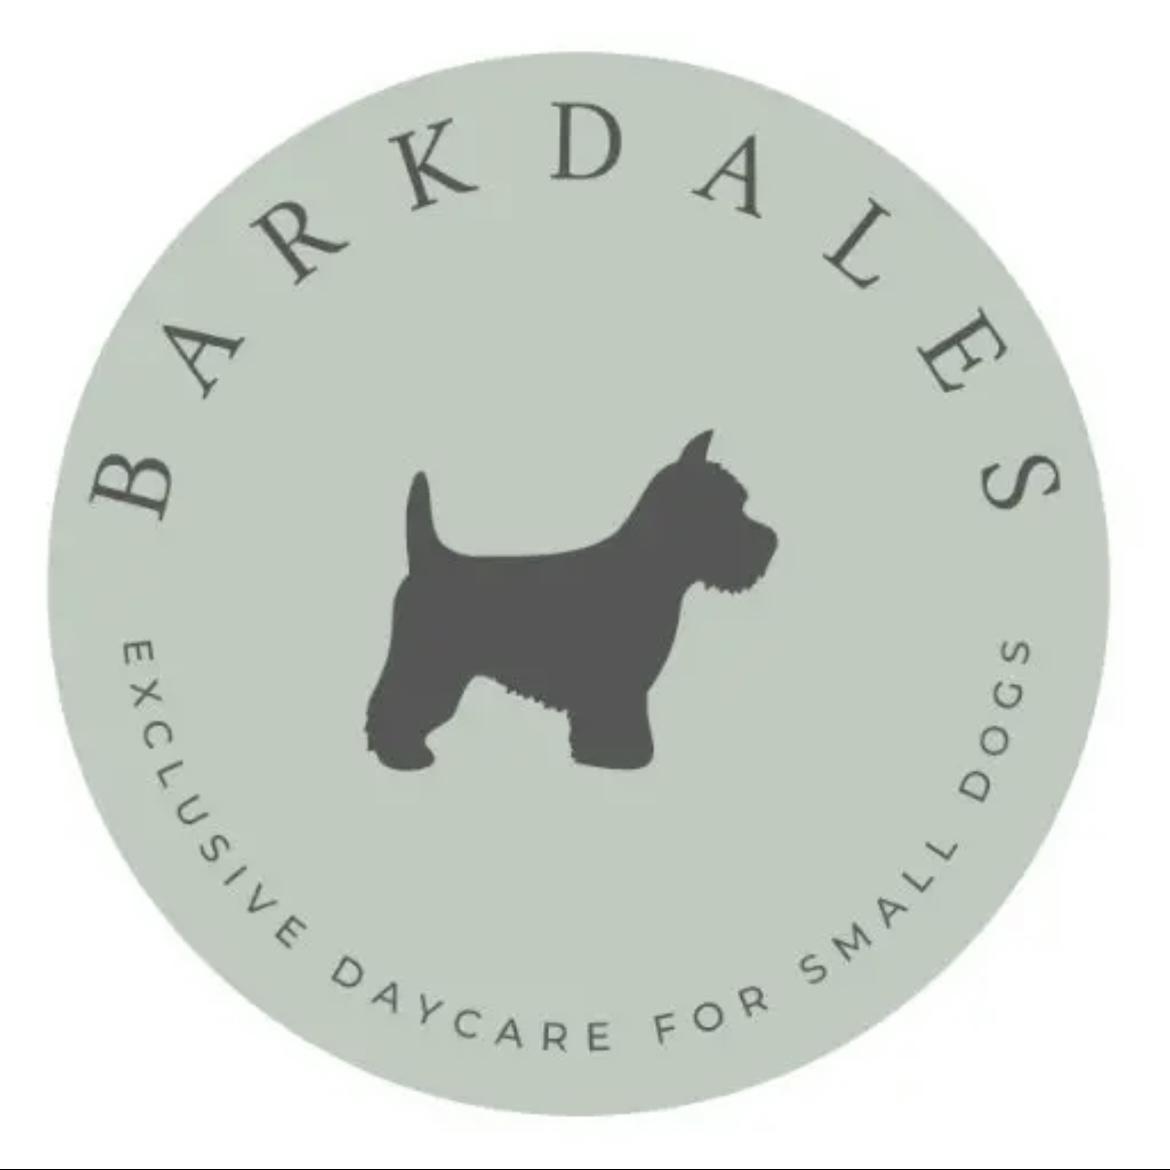 Barkdales's images